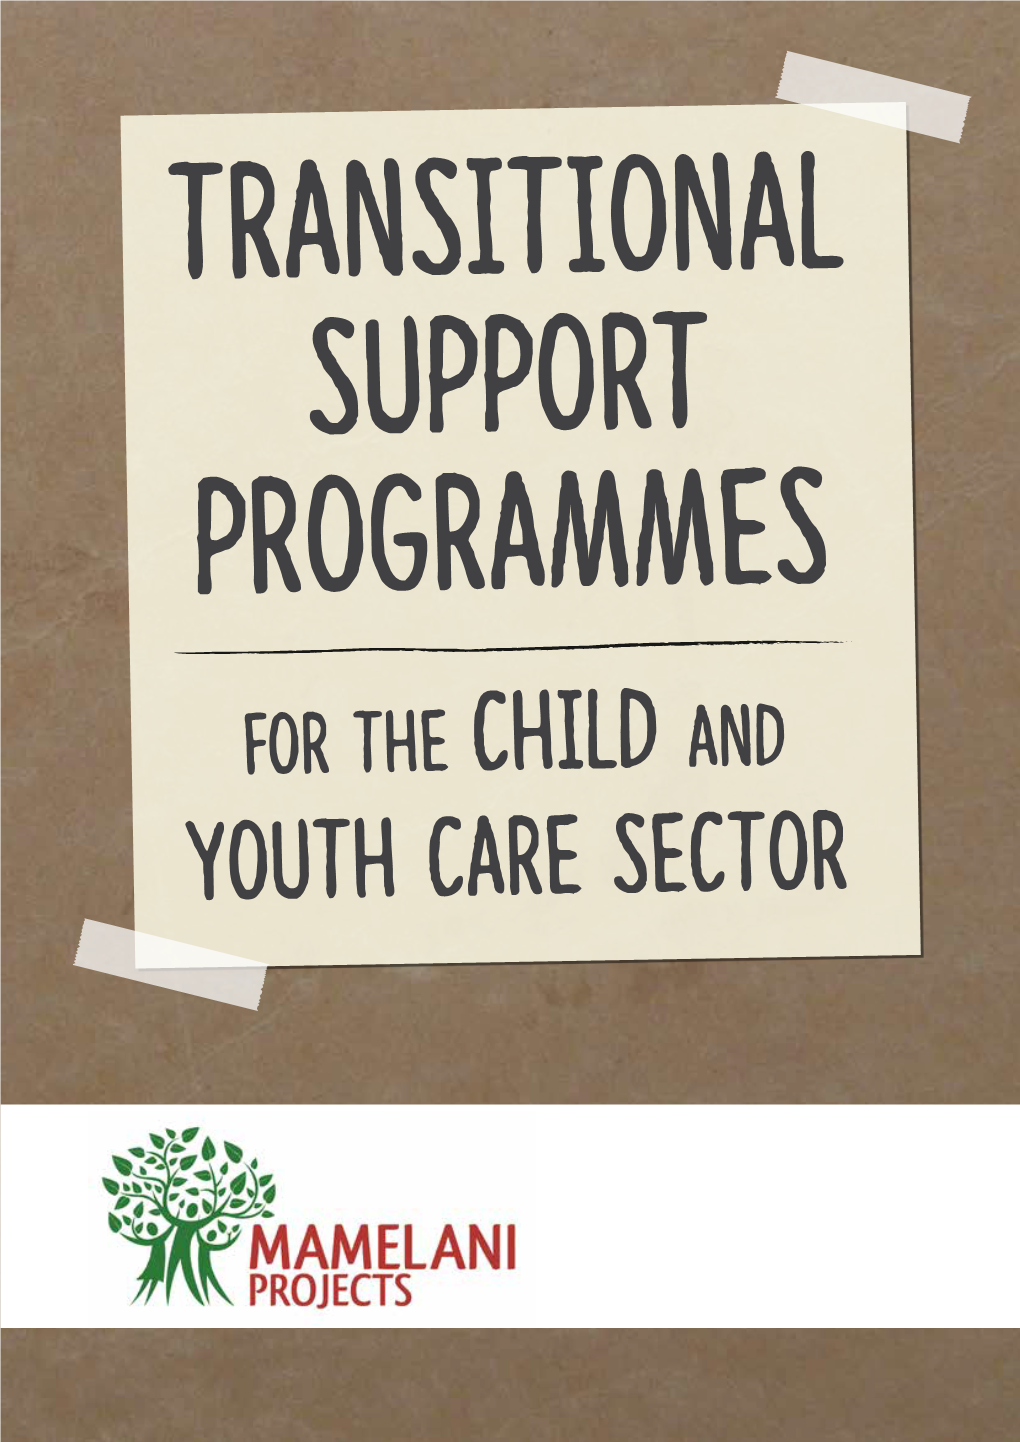 Transitional Support Programmes for the Child and Youth Care Sector.Pdf